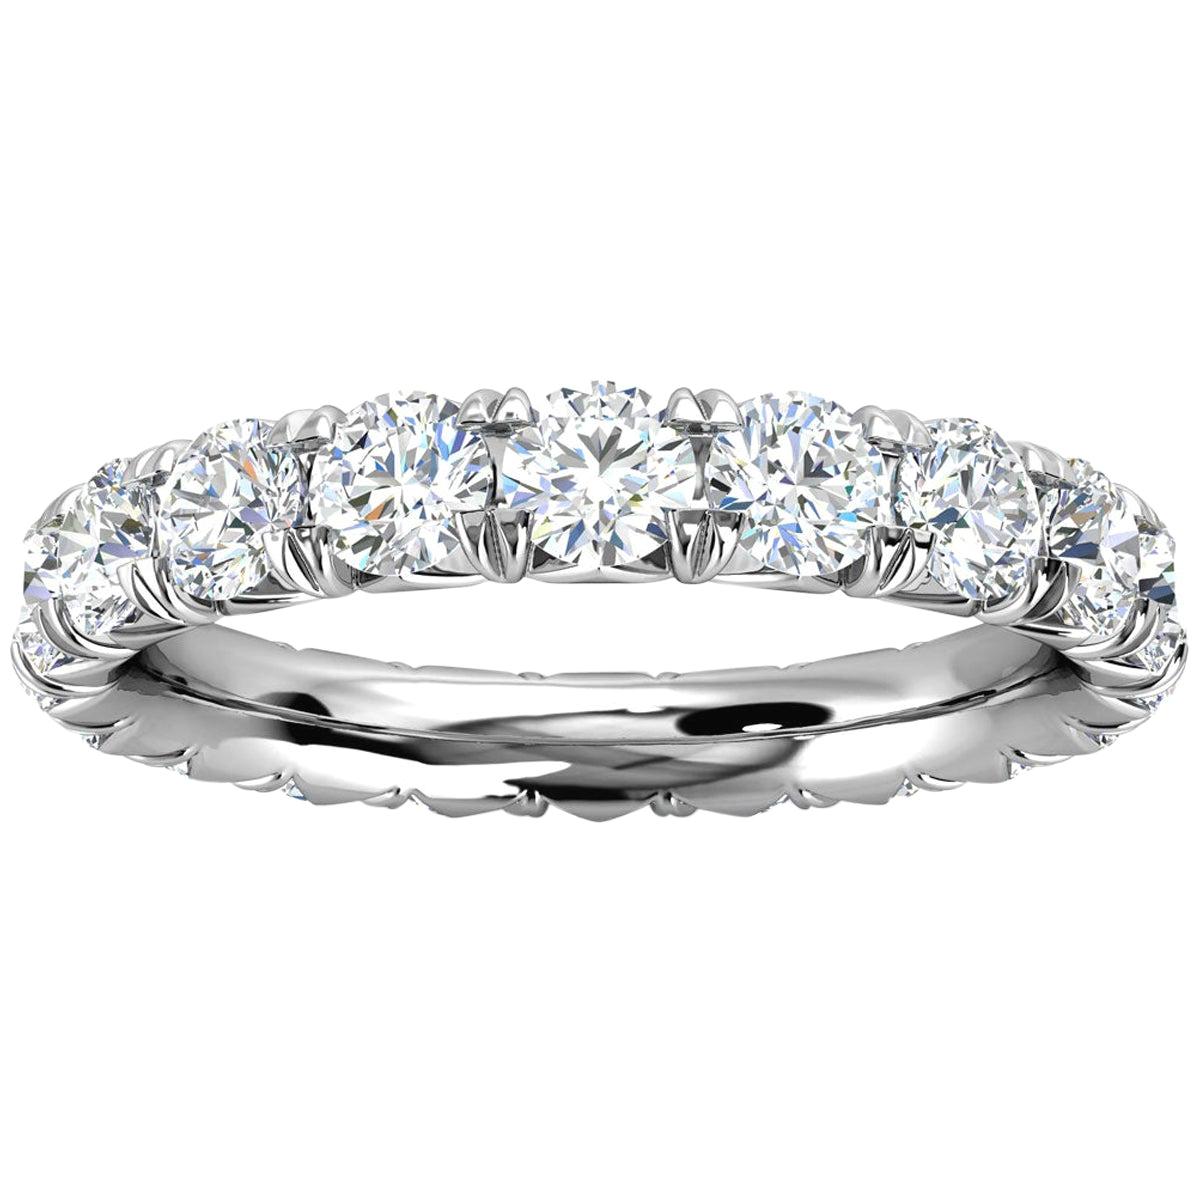 For Sale:  18k White Gold Mia French Pave Diamond Eternity Ring '2 Ct. Tw'